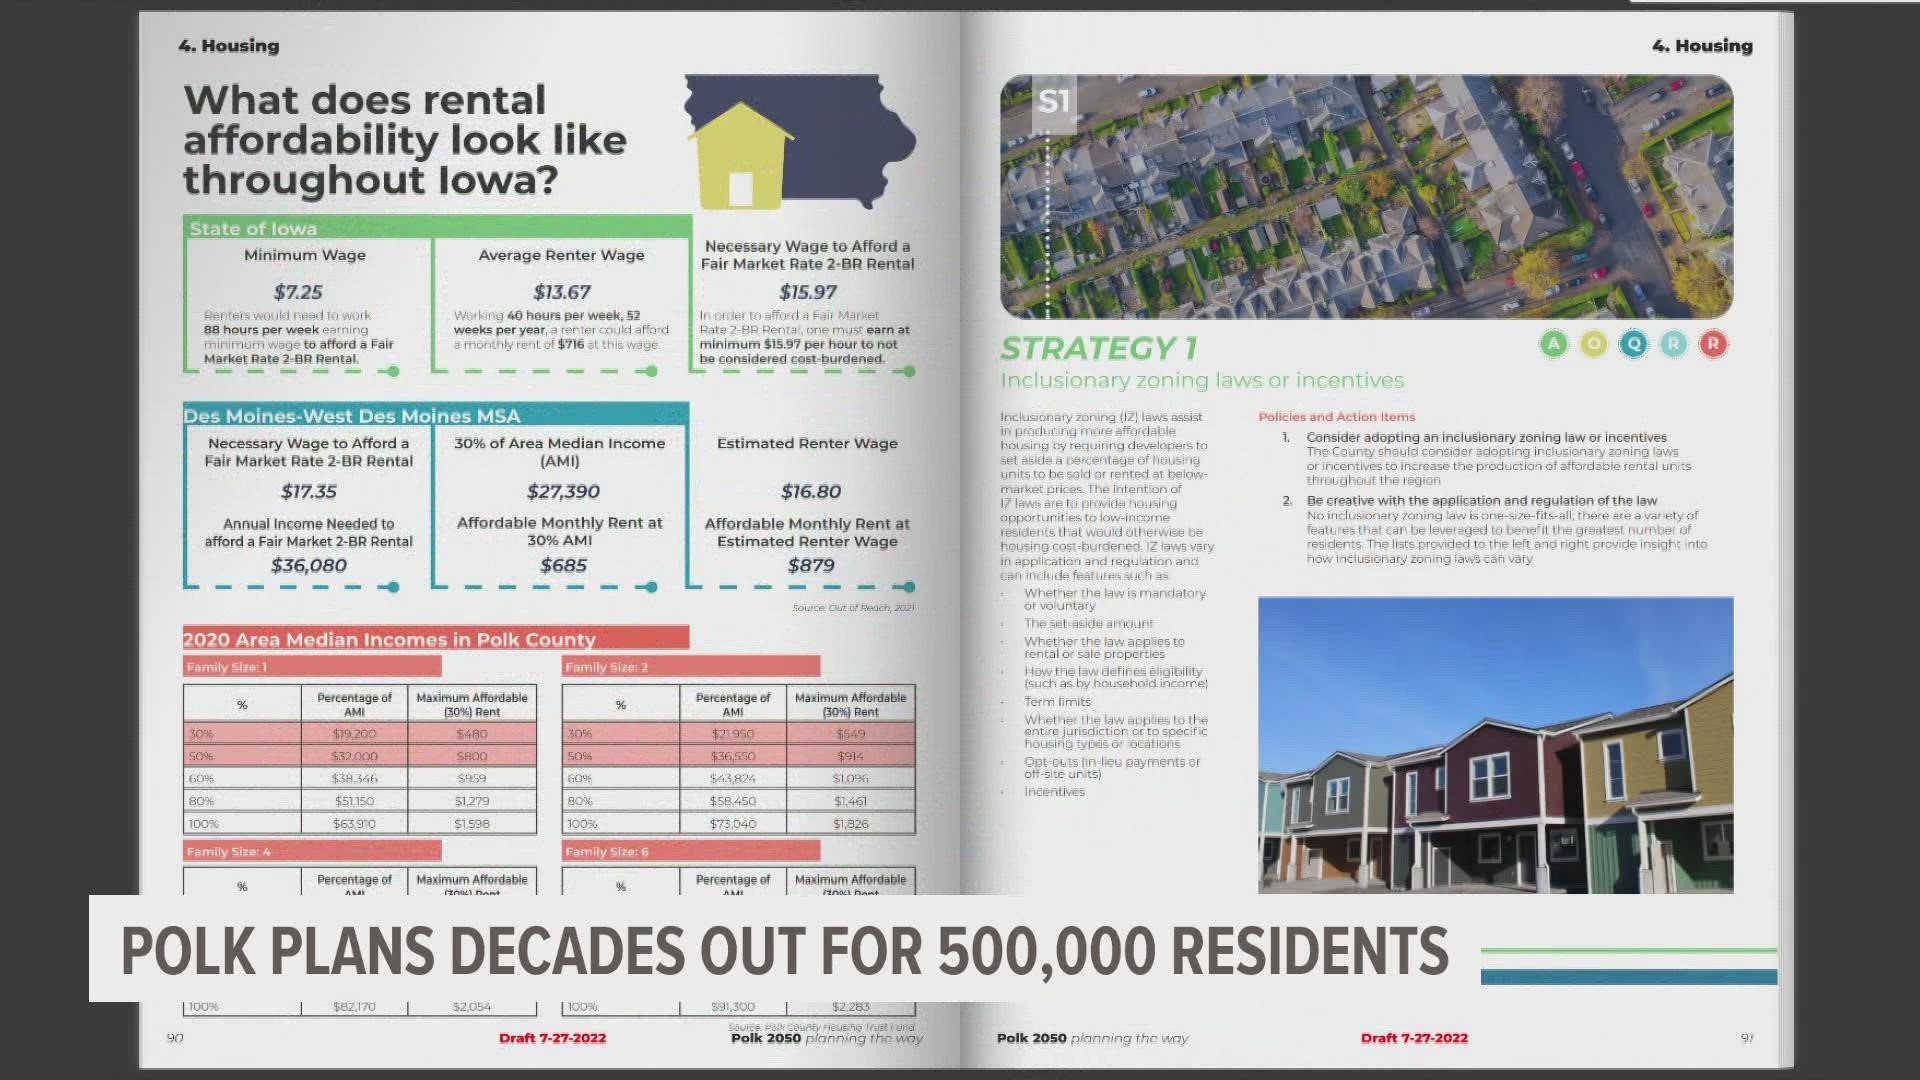 The plan, which will affect around 500,000 residents, tackles housing, agriculture and more decades in advance.